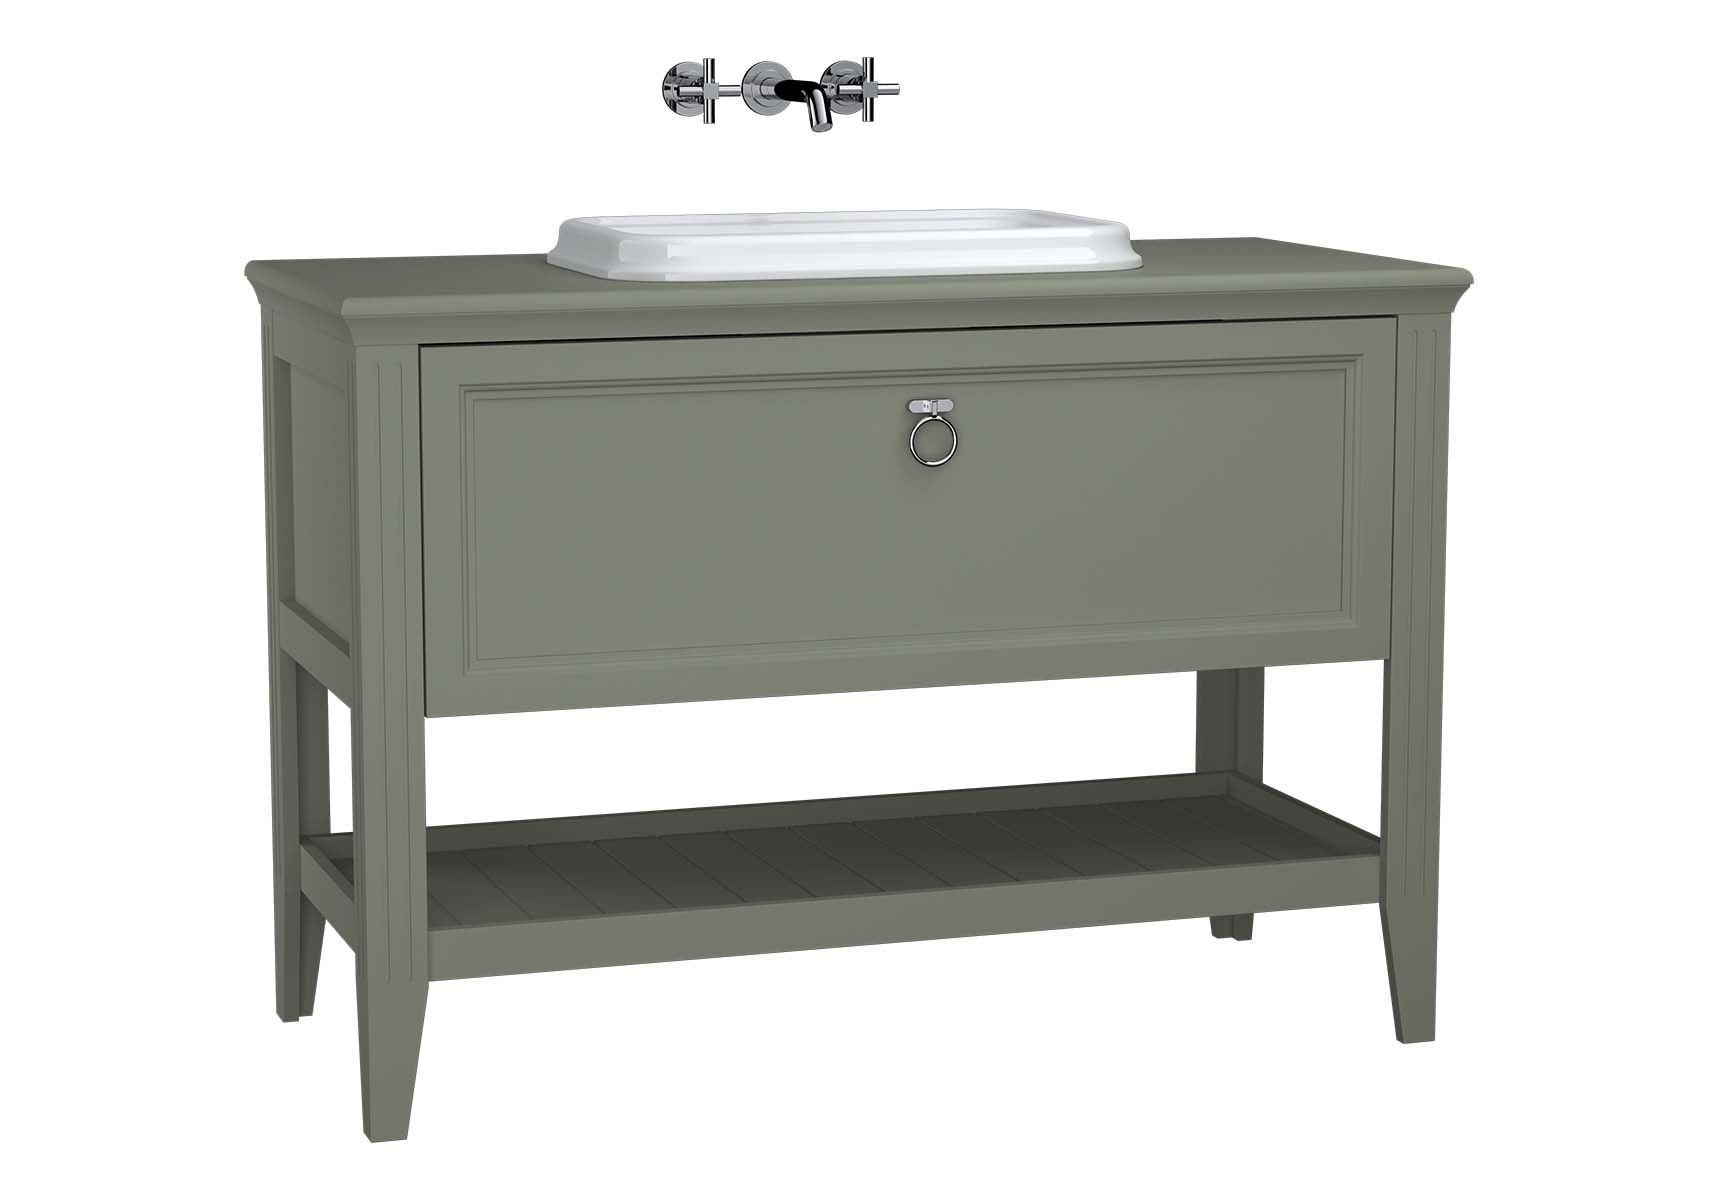 Valarte Washbasin Unit, 120 cm, with drawers, with countertop washbasin, Matte Grey